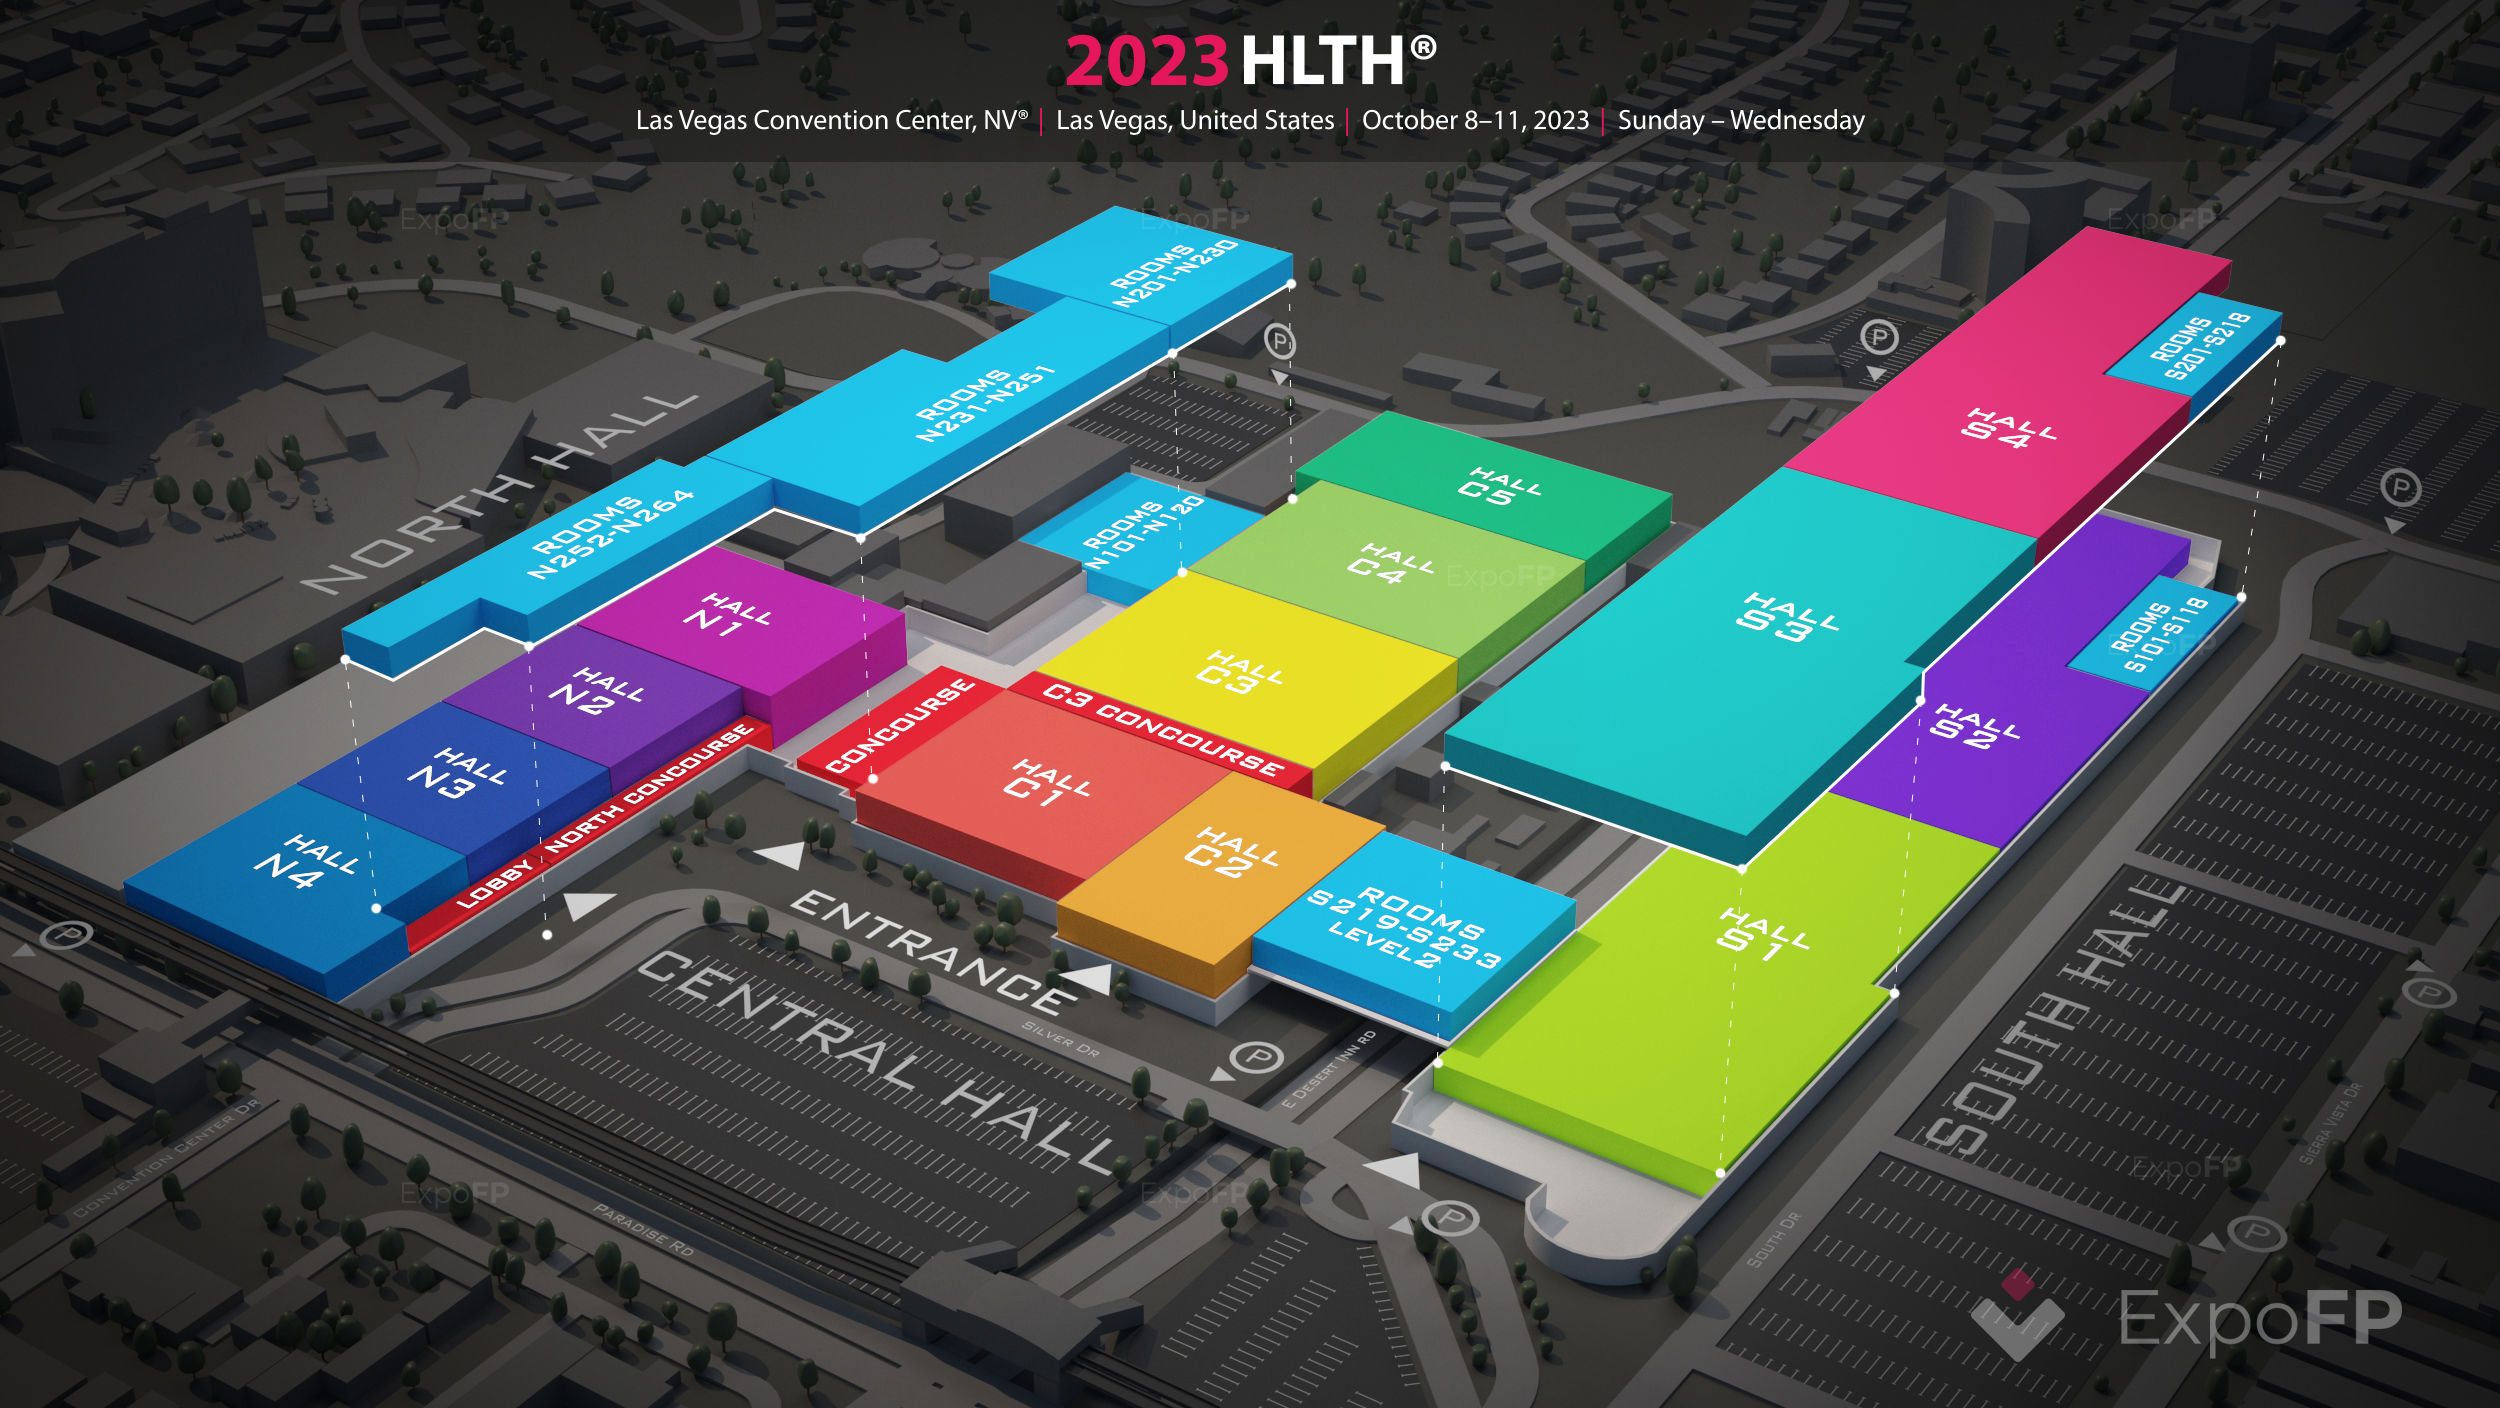 HLTH 2023 in Las Vegas Convention Center, NV